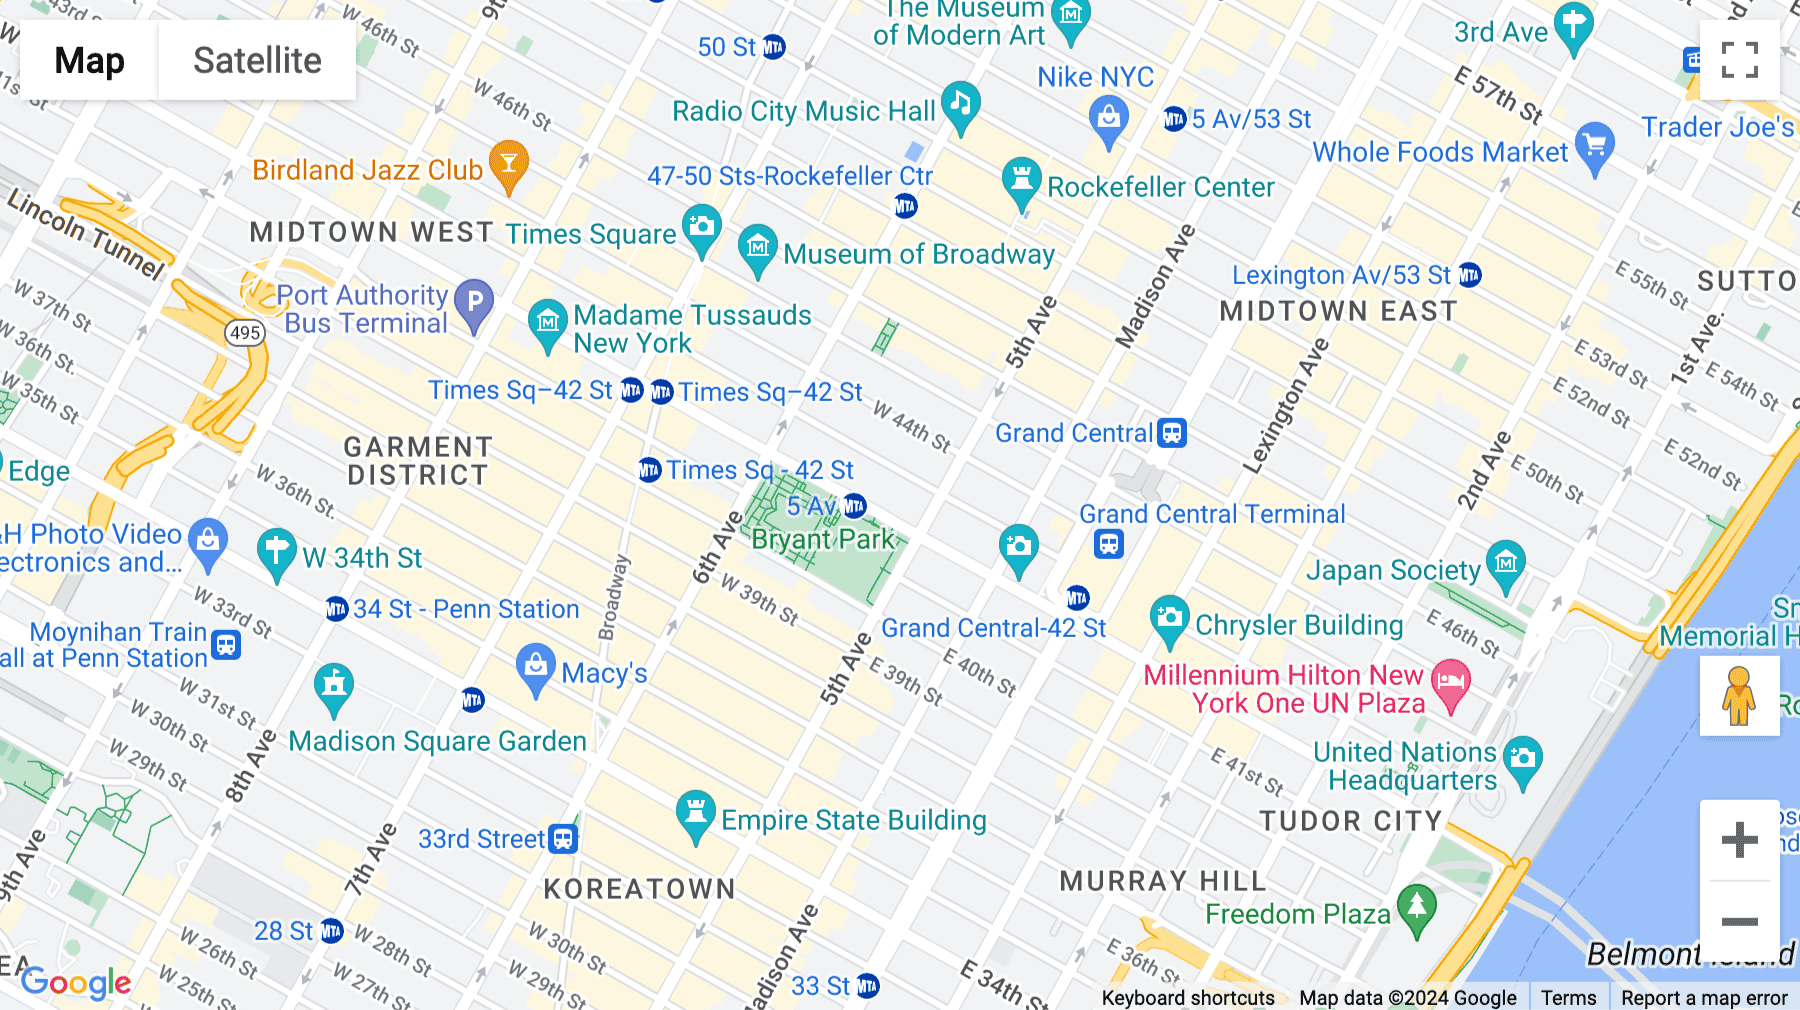 Click for interative map of 500 5th Avenue, New York City